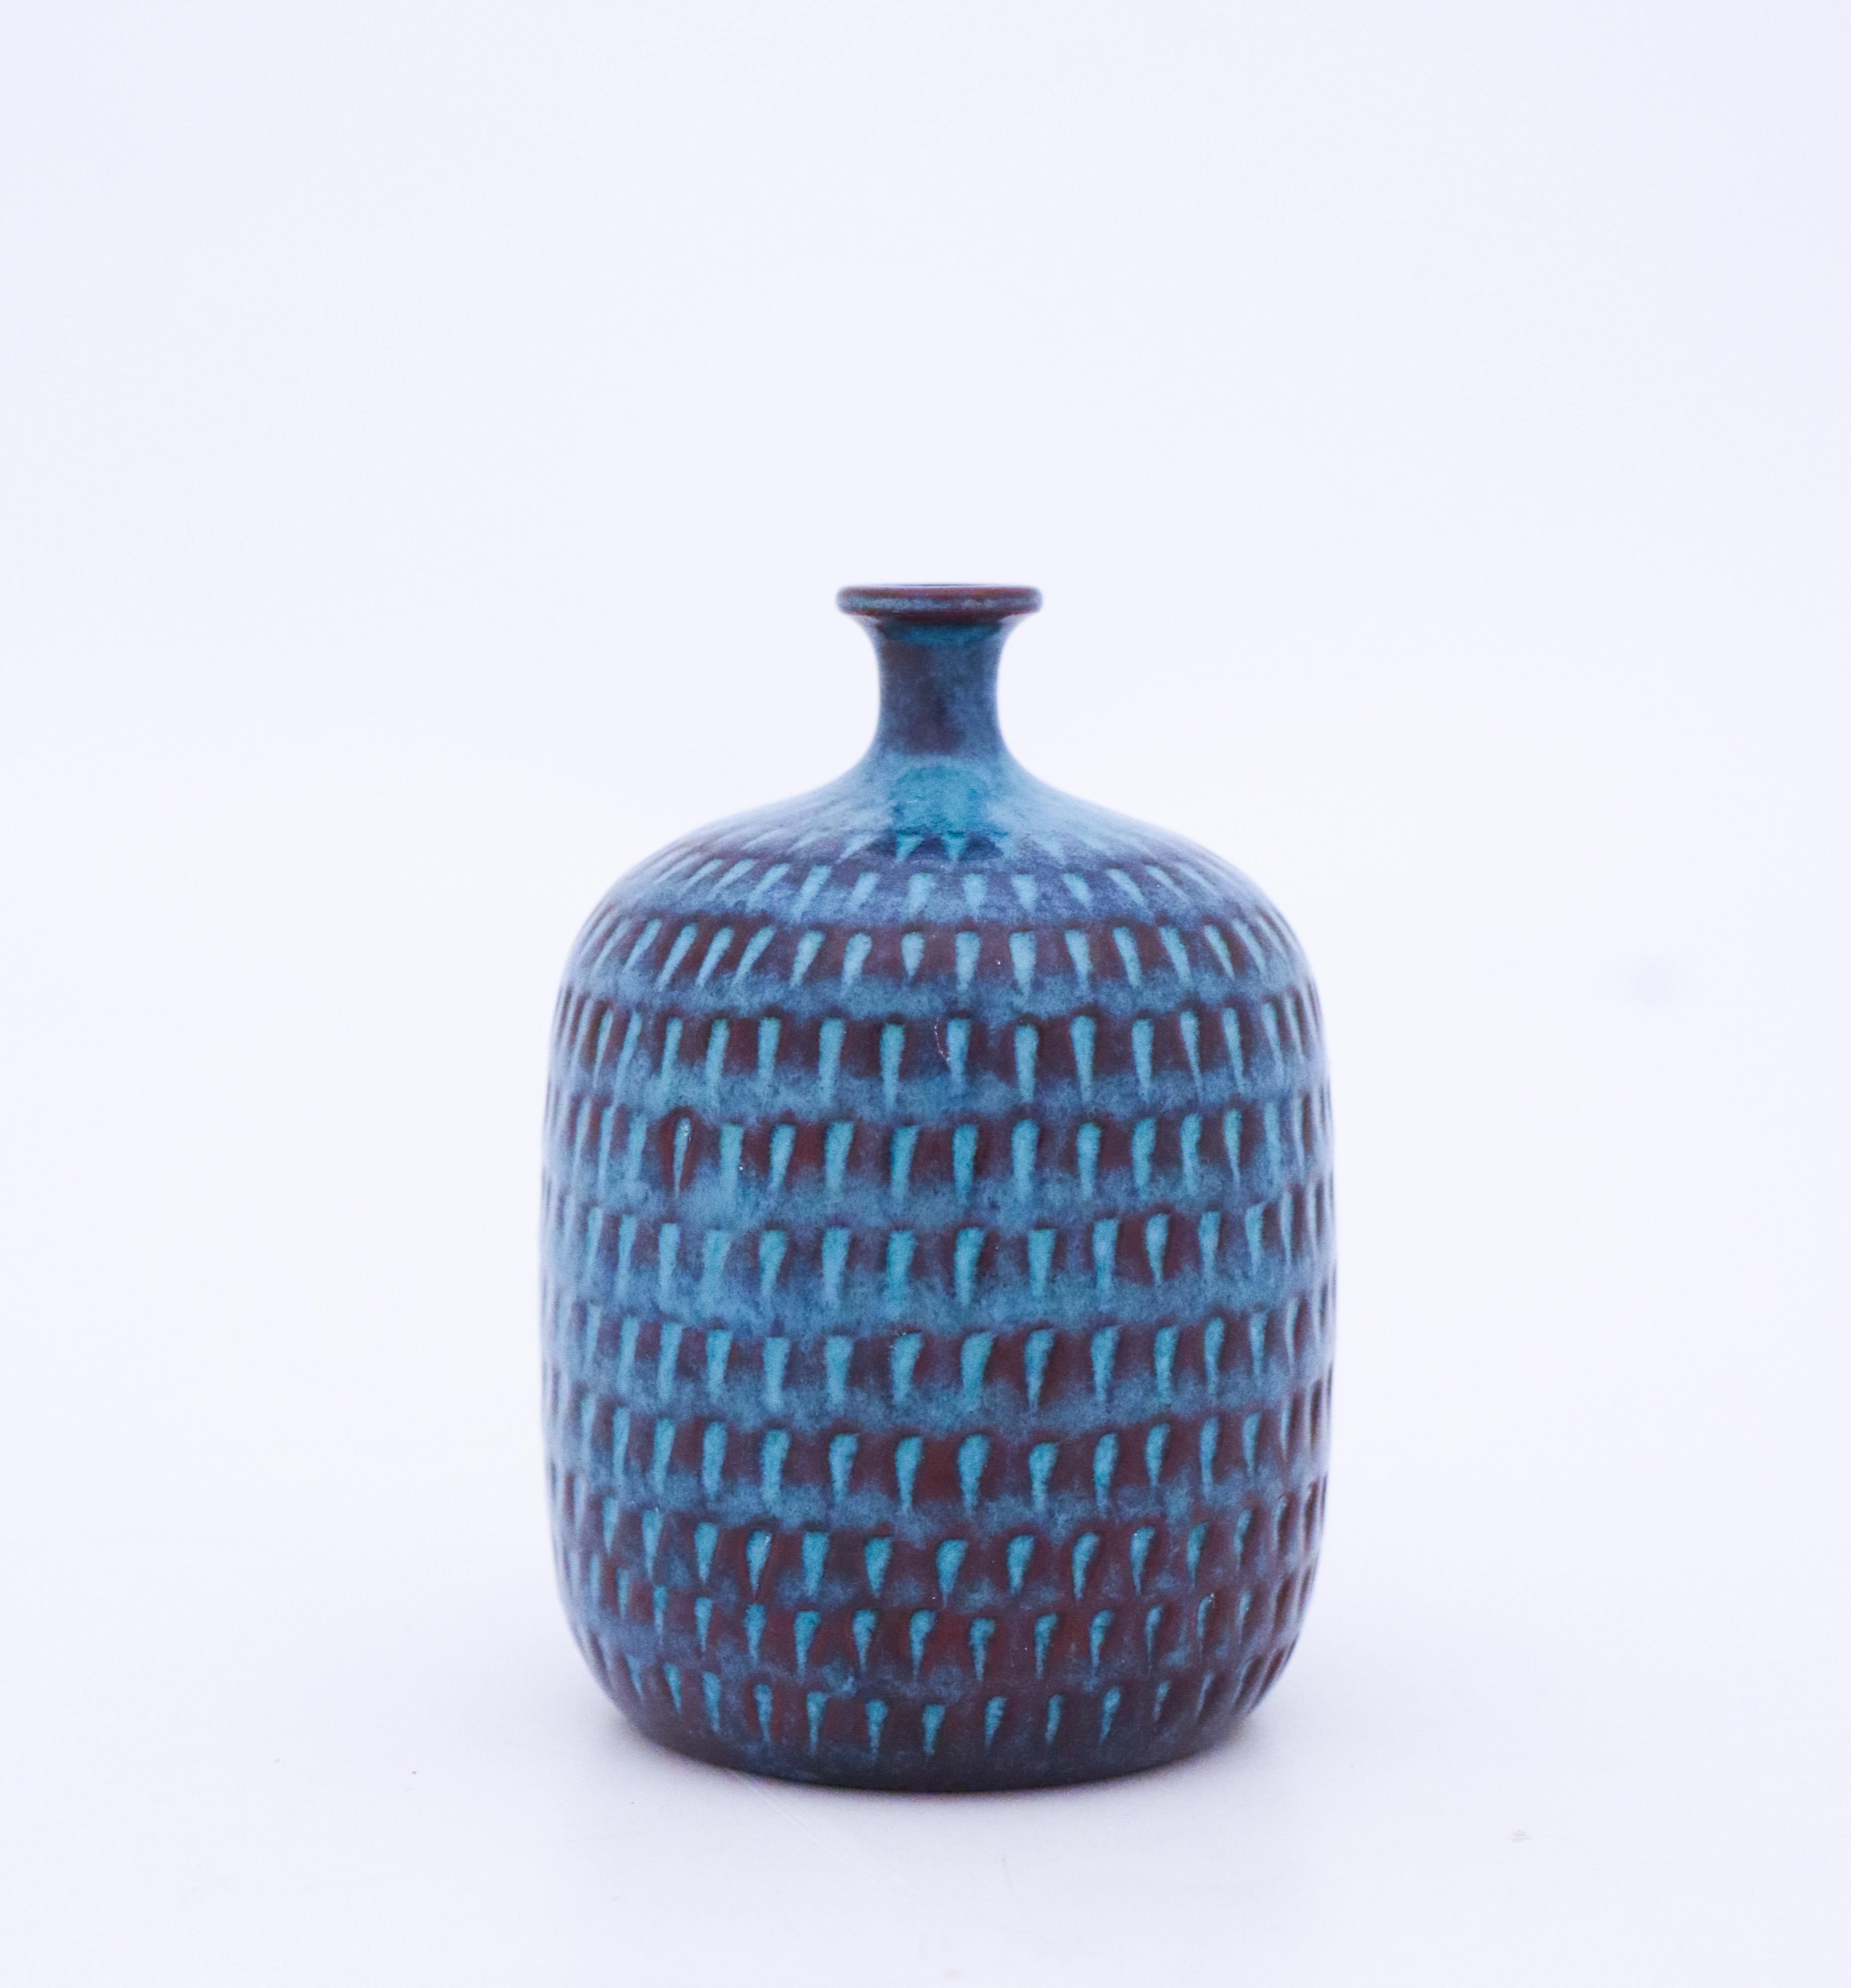 A turquoise vase designed by Stig Lindberg at Gustavsberg. It is 8.5 cm high and in very good condition.